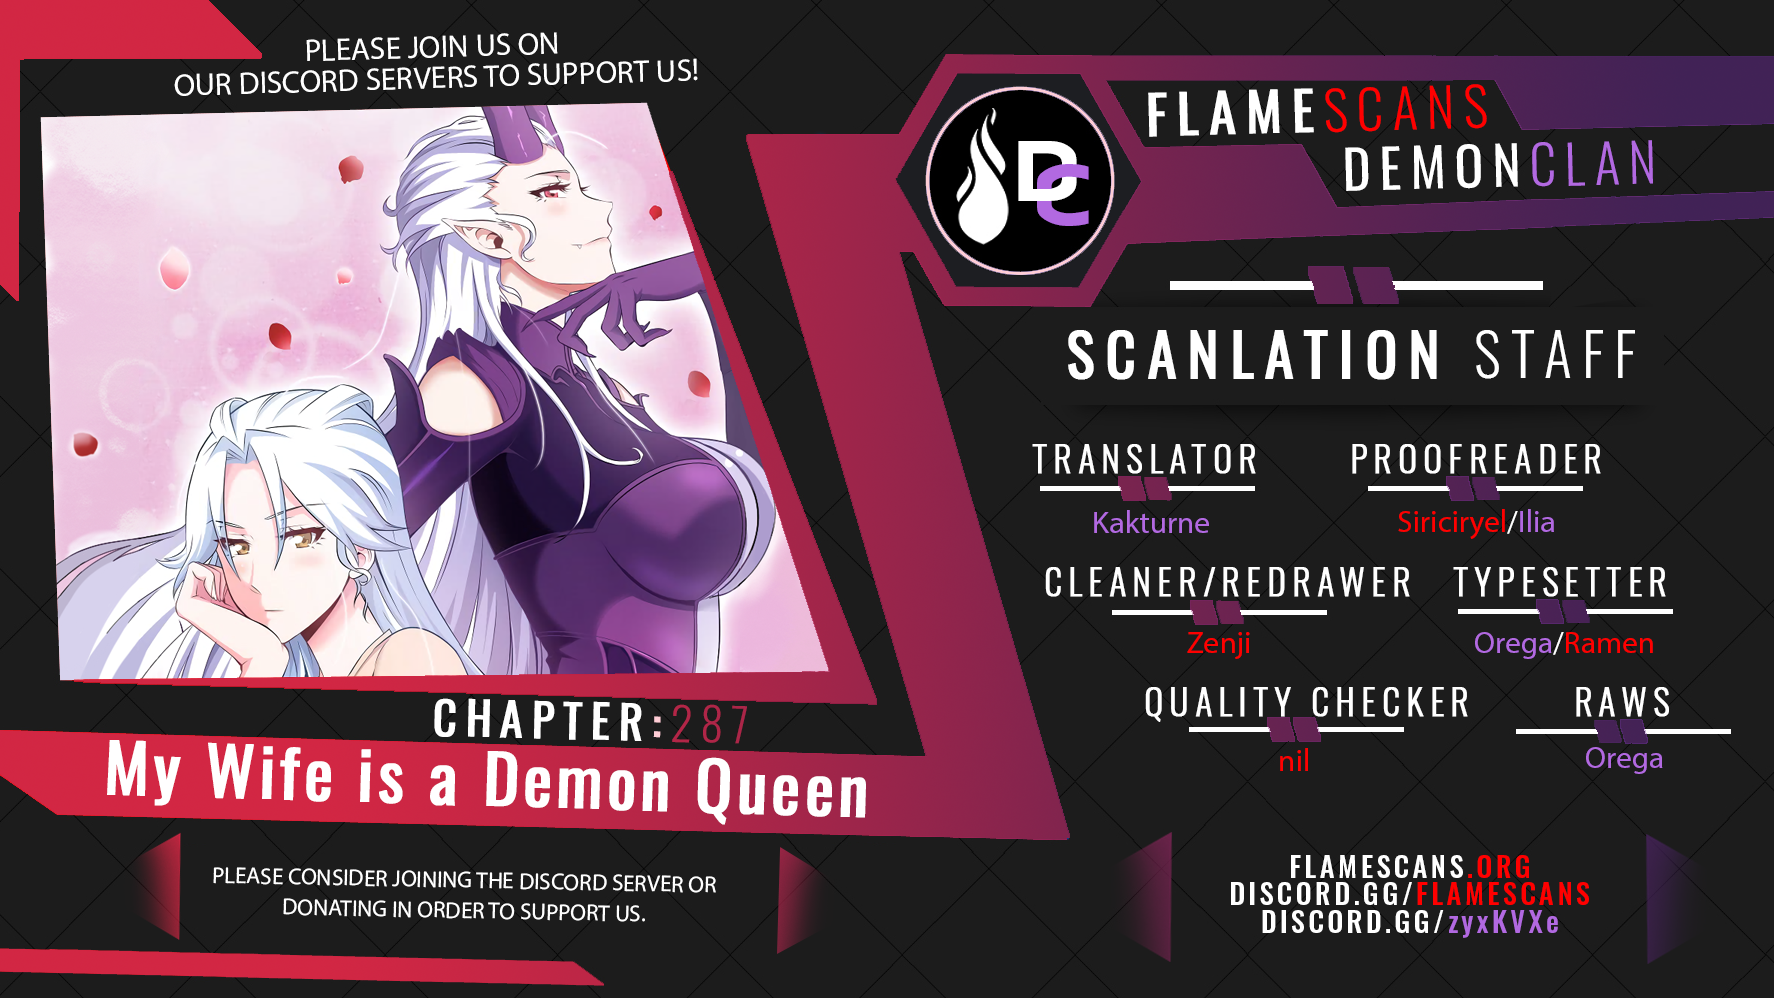 My Wife is a Demon Queen - Chapter 9361 - Image 1